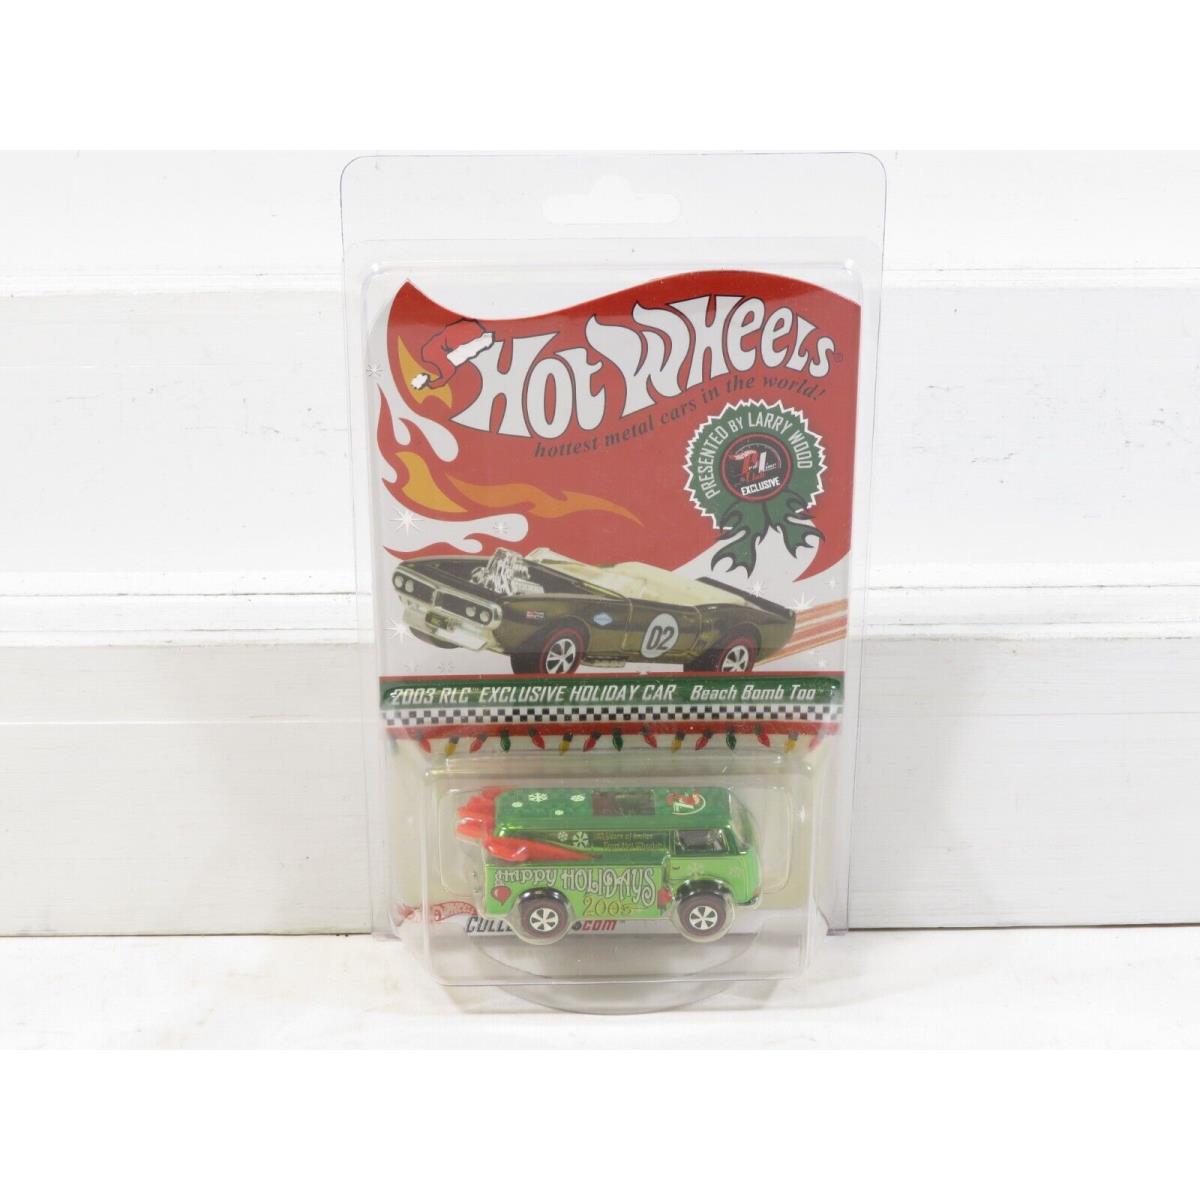 Hot Wheels 2003 Rcl Exclusive Holiday Car Beach Bomb Too 0074